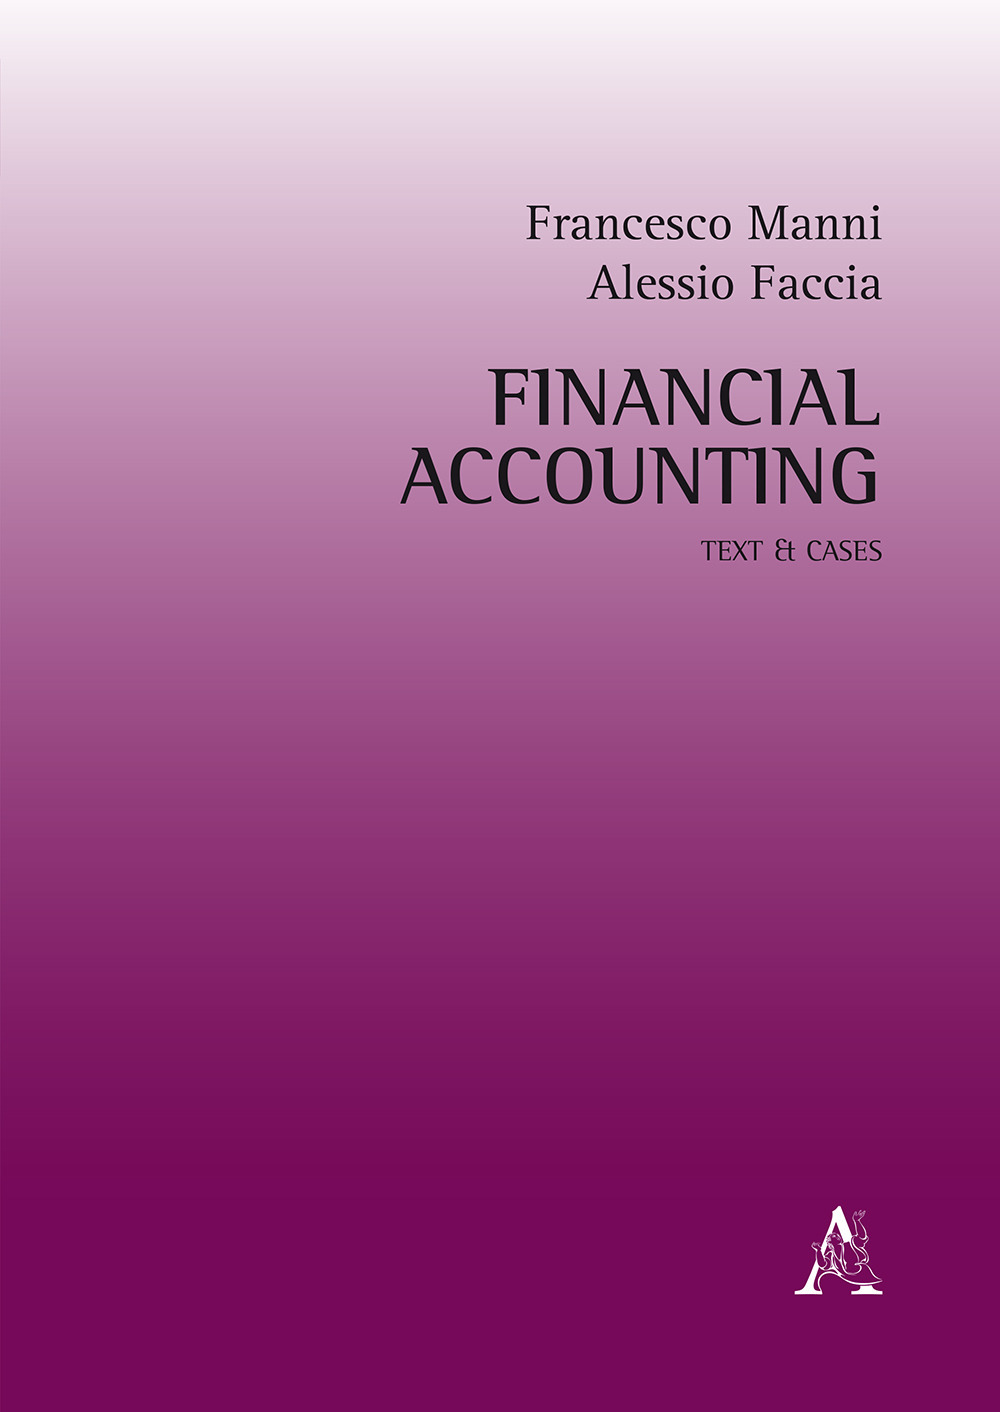 Financial accounting. Text & cases